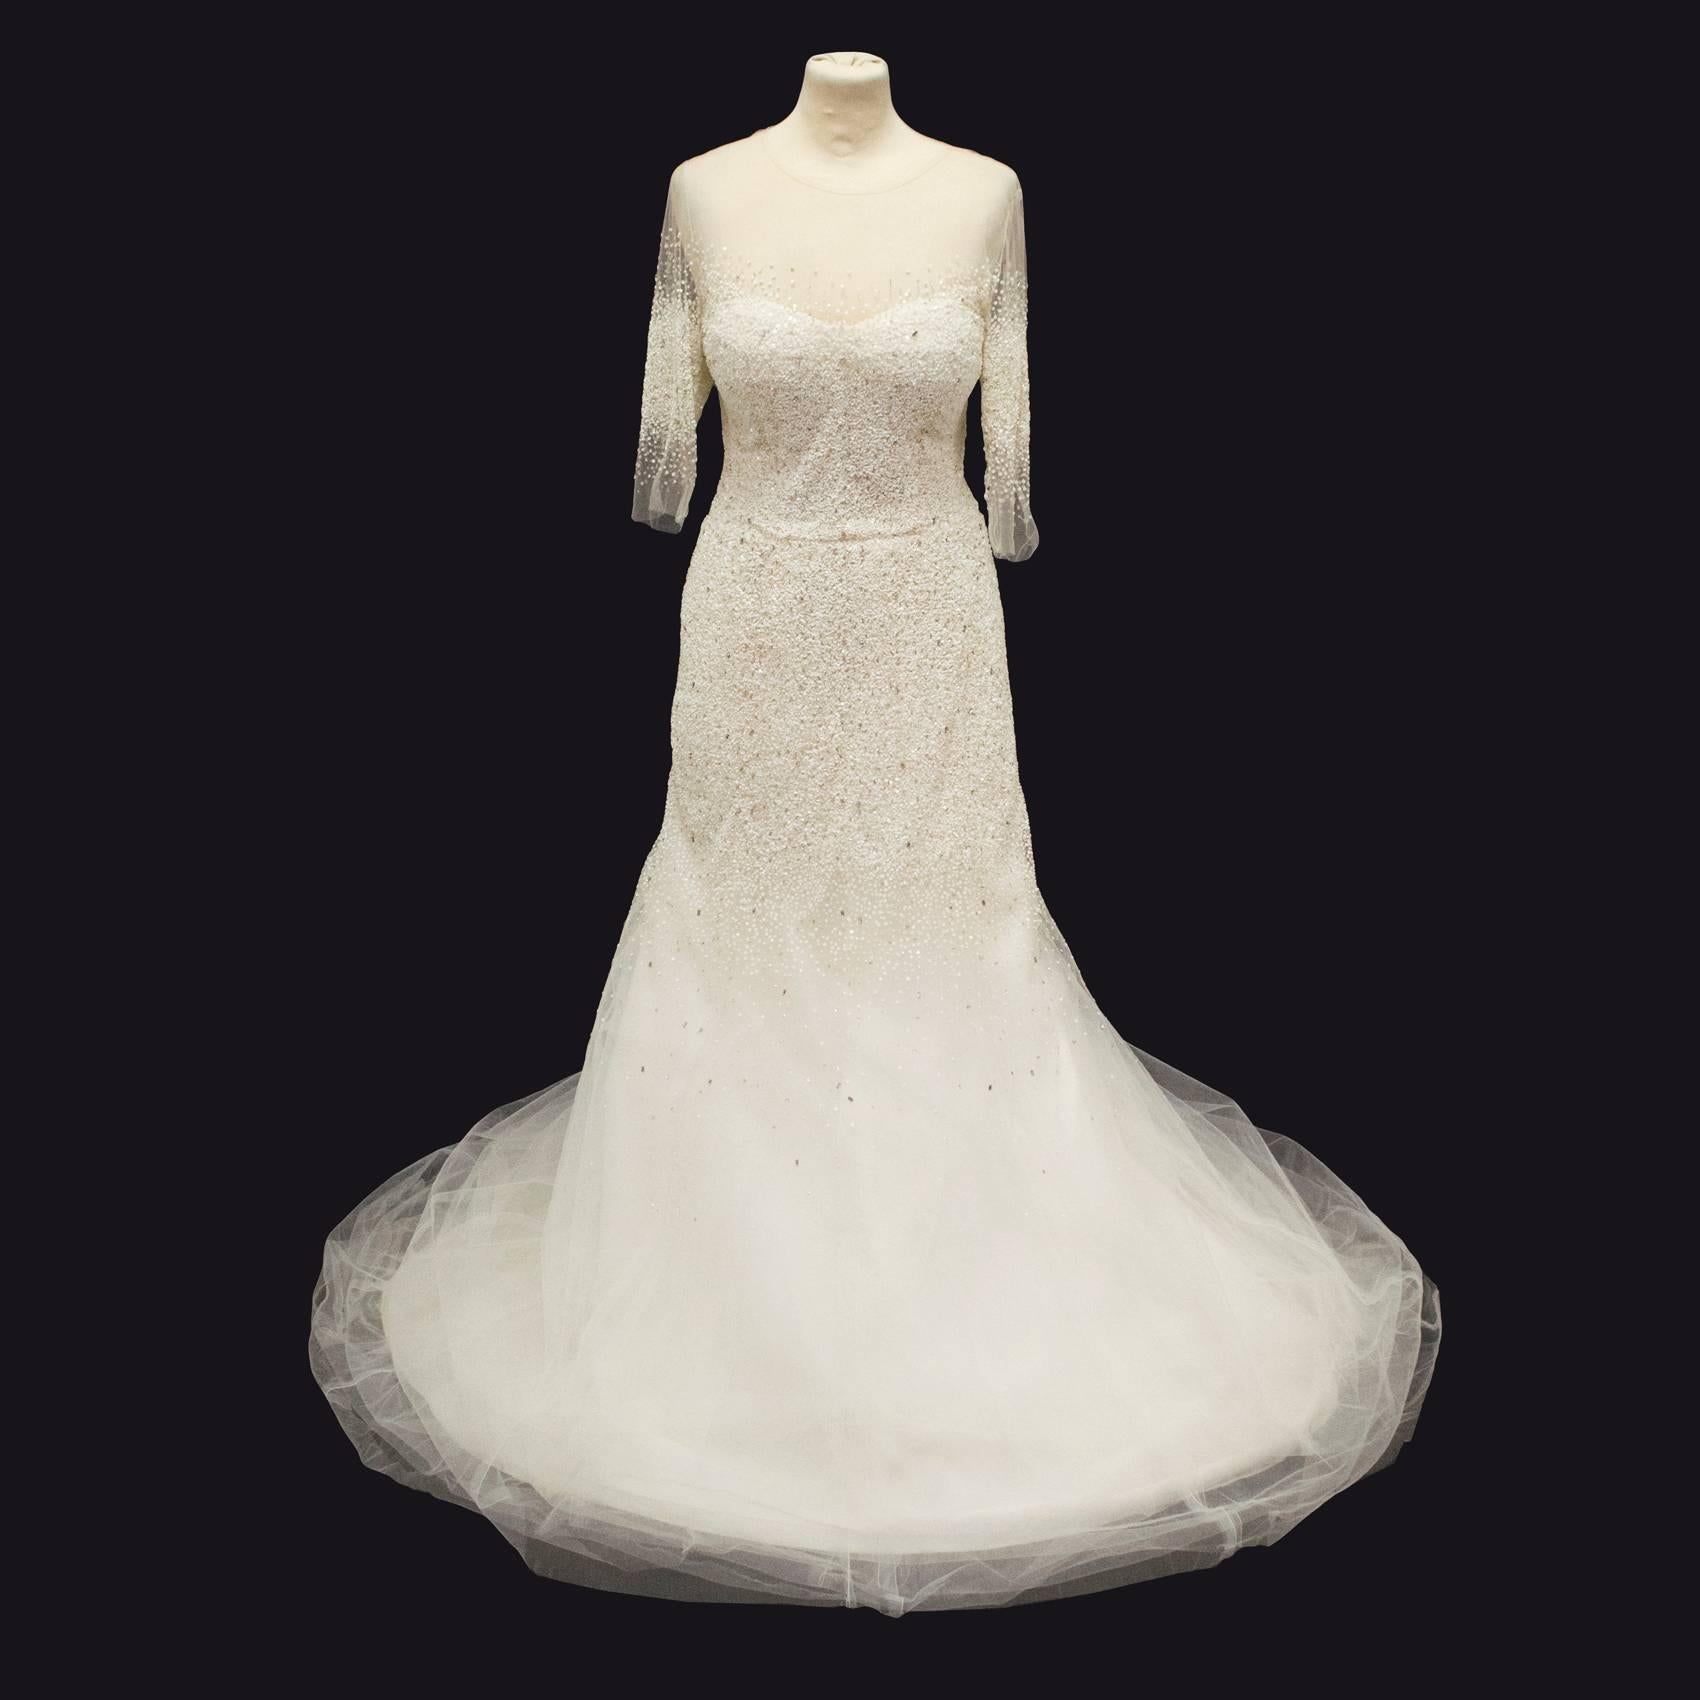 Monique Lhuillier custom made hand embellished wedding dress, with 10 layers of hem fabric. A myriad of netted mesh and silk blended  fabric with a sheer overlay embellished with beads, sequins and Swarovski crystals. 3/4 length sleeves with